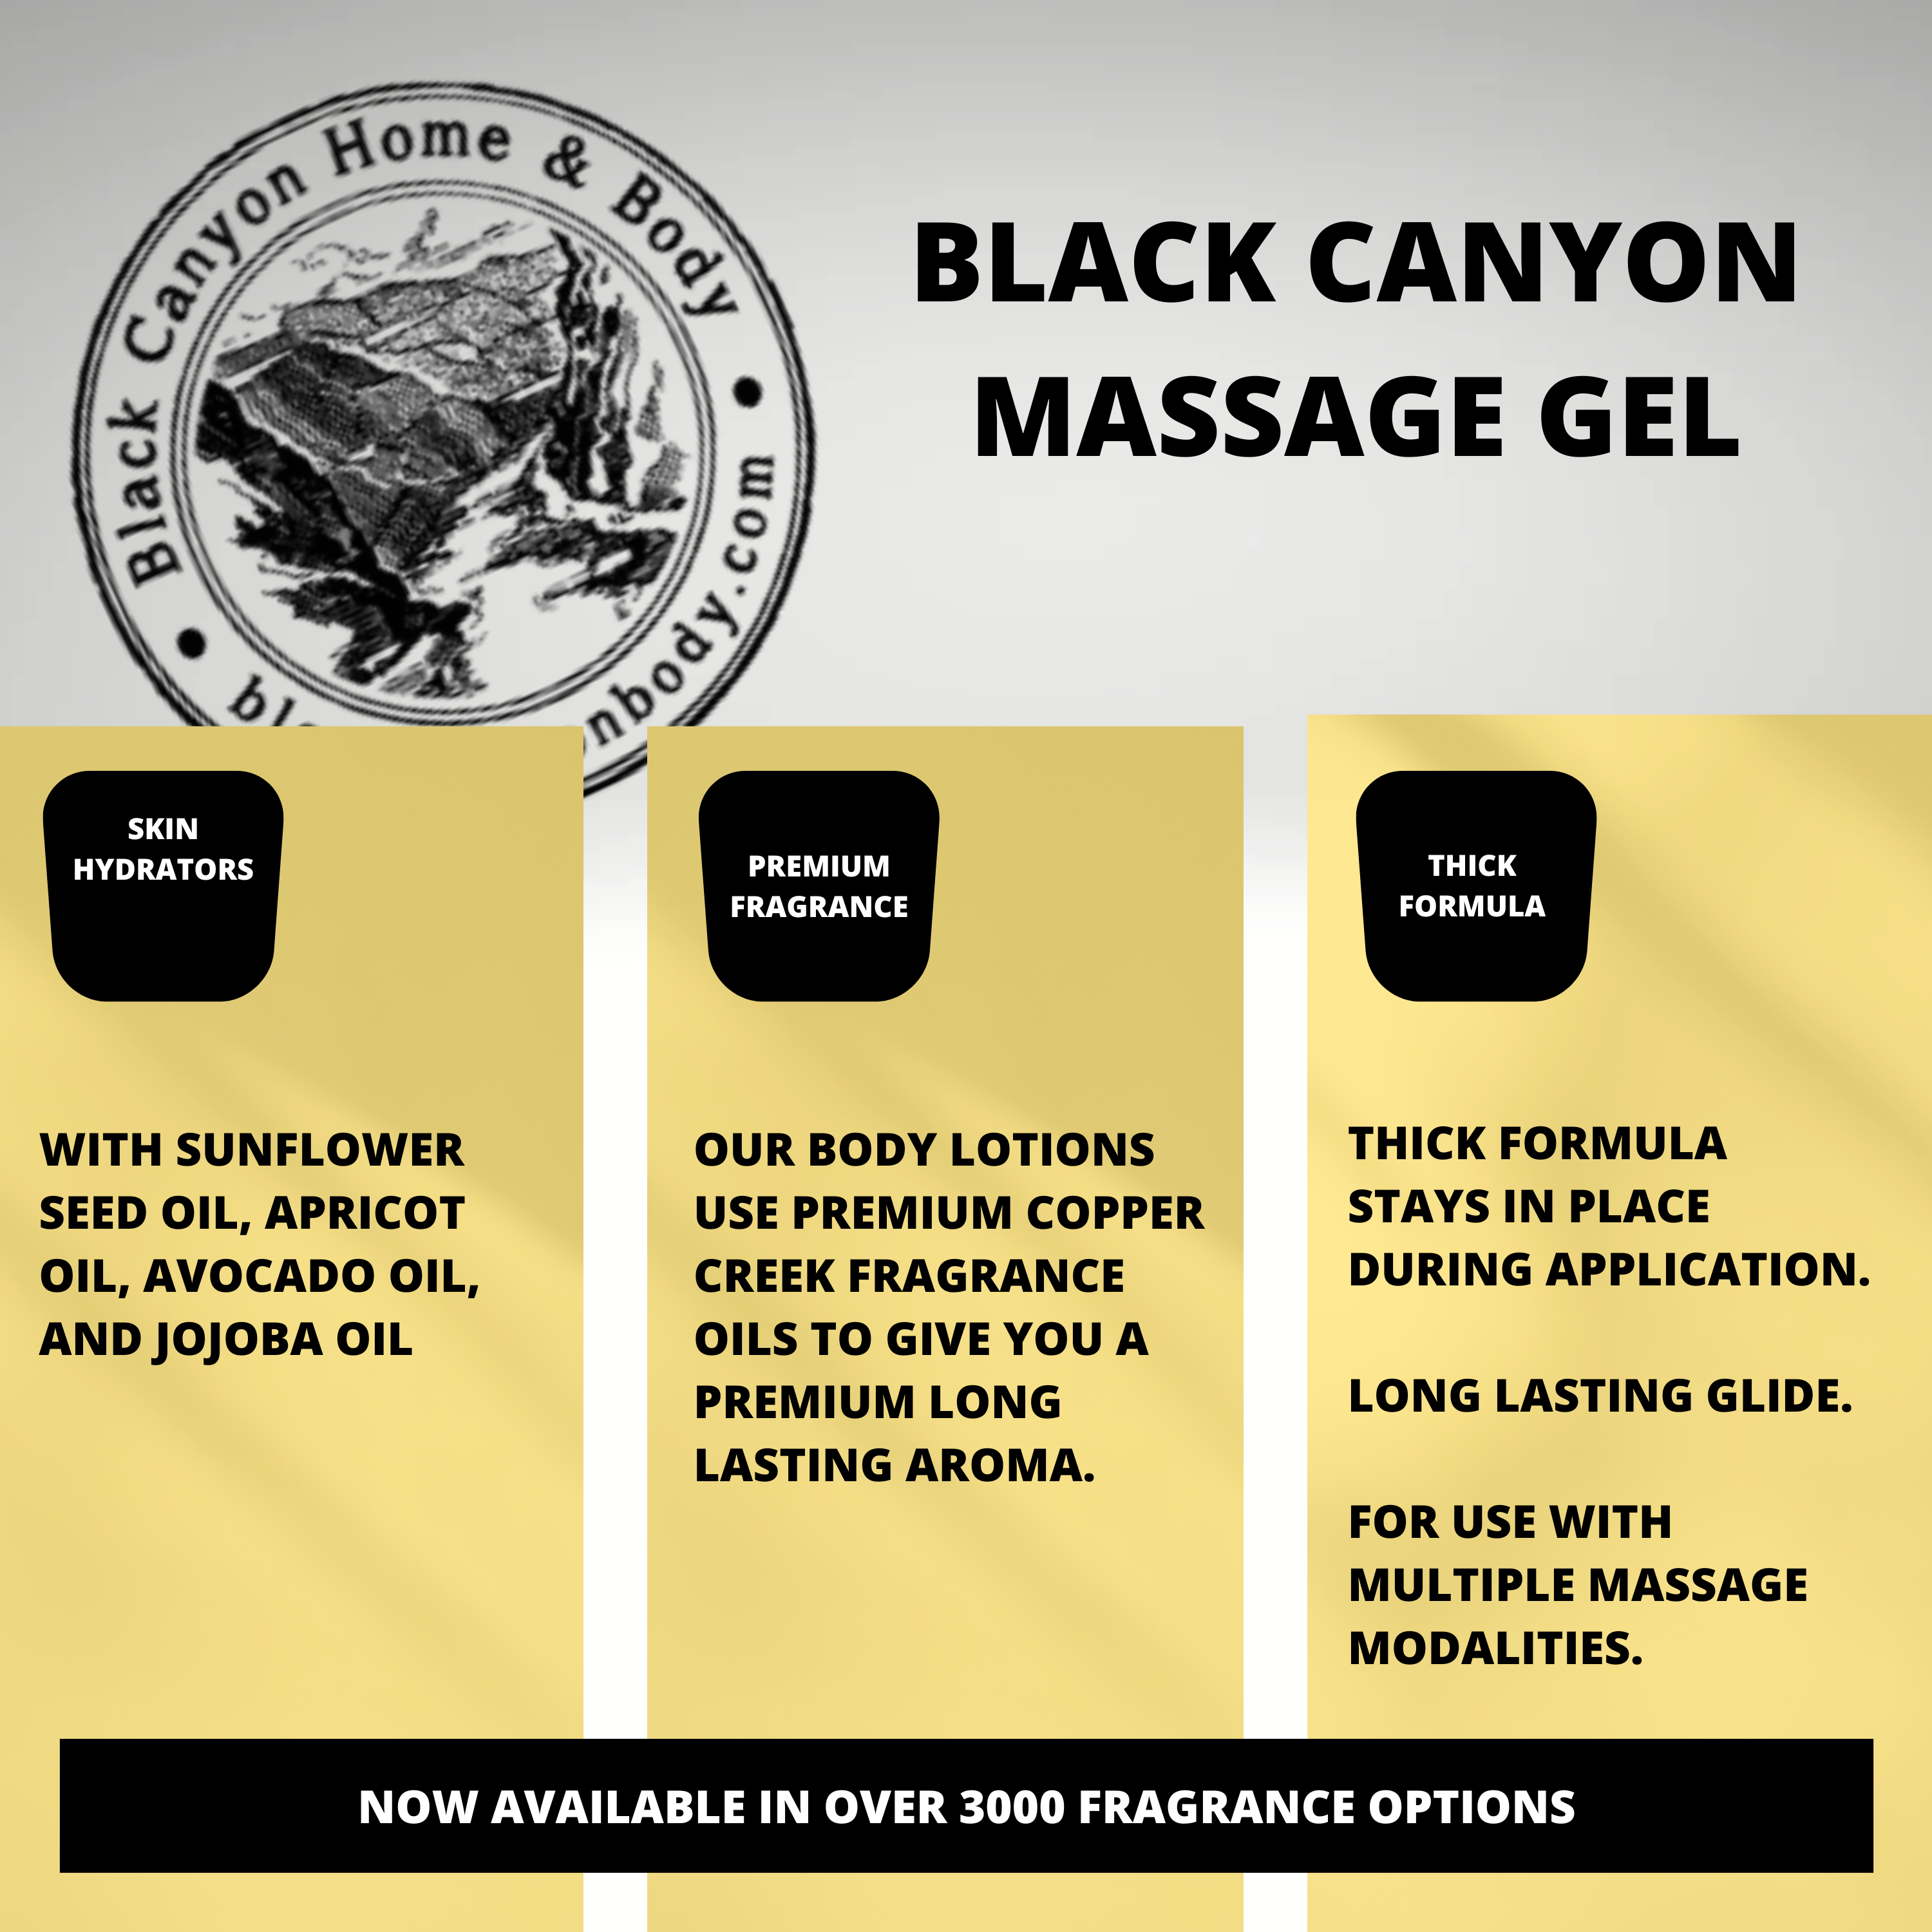 Black Canyon Apricot Slices Scented Massage Gel